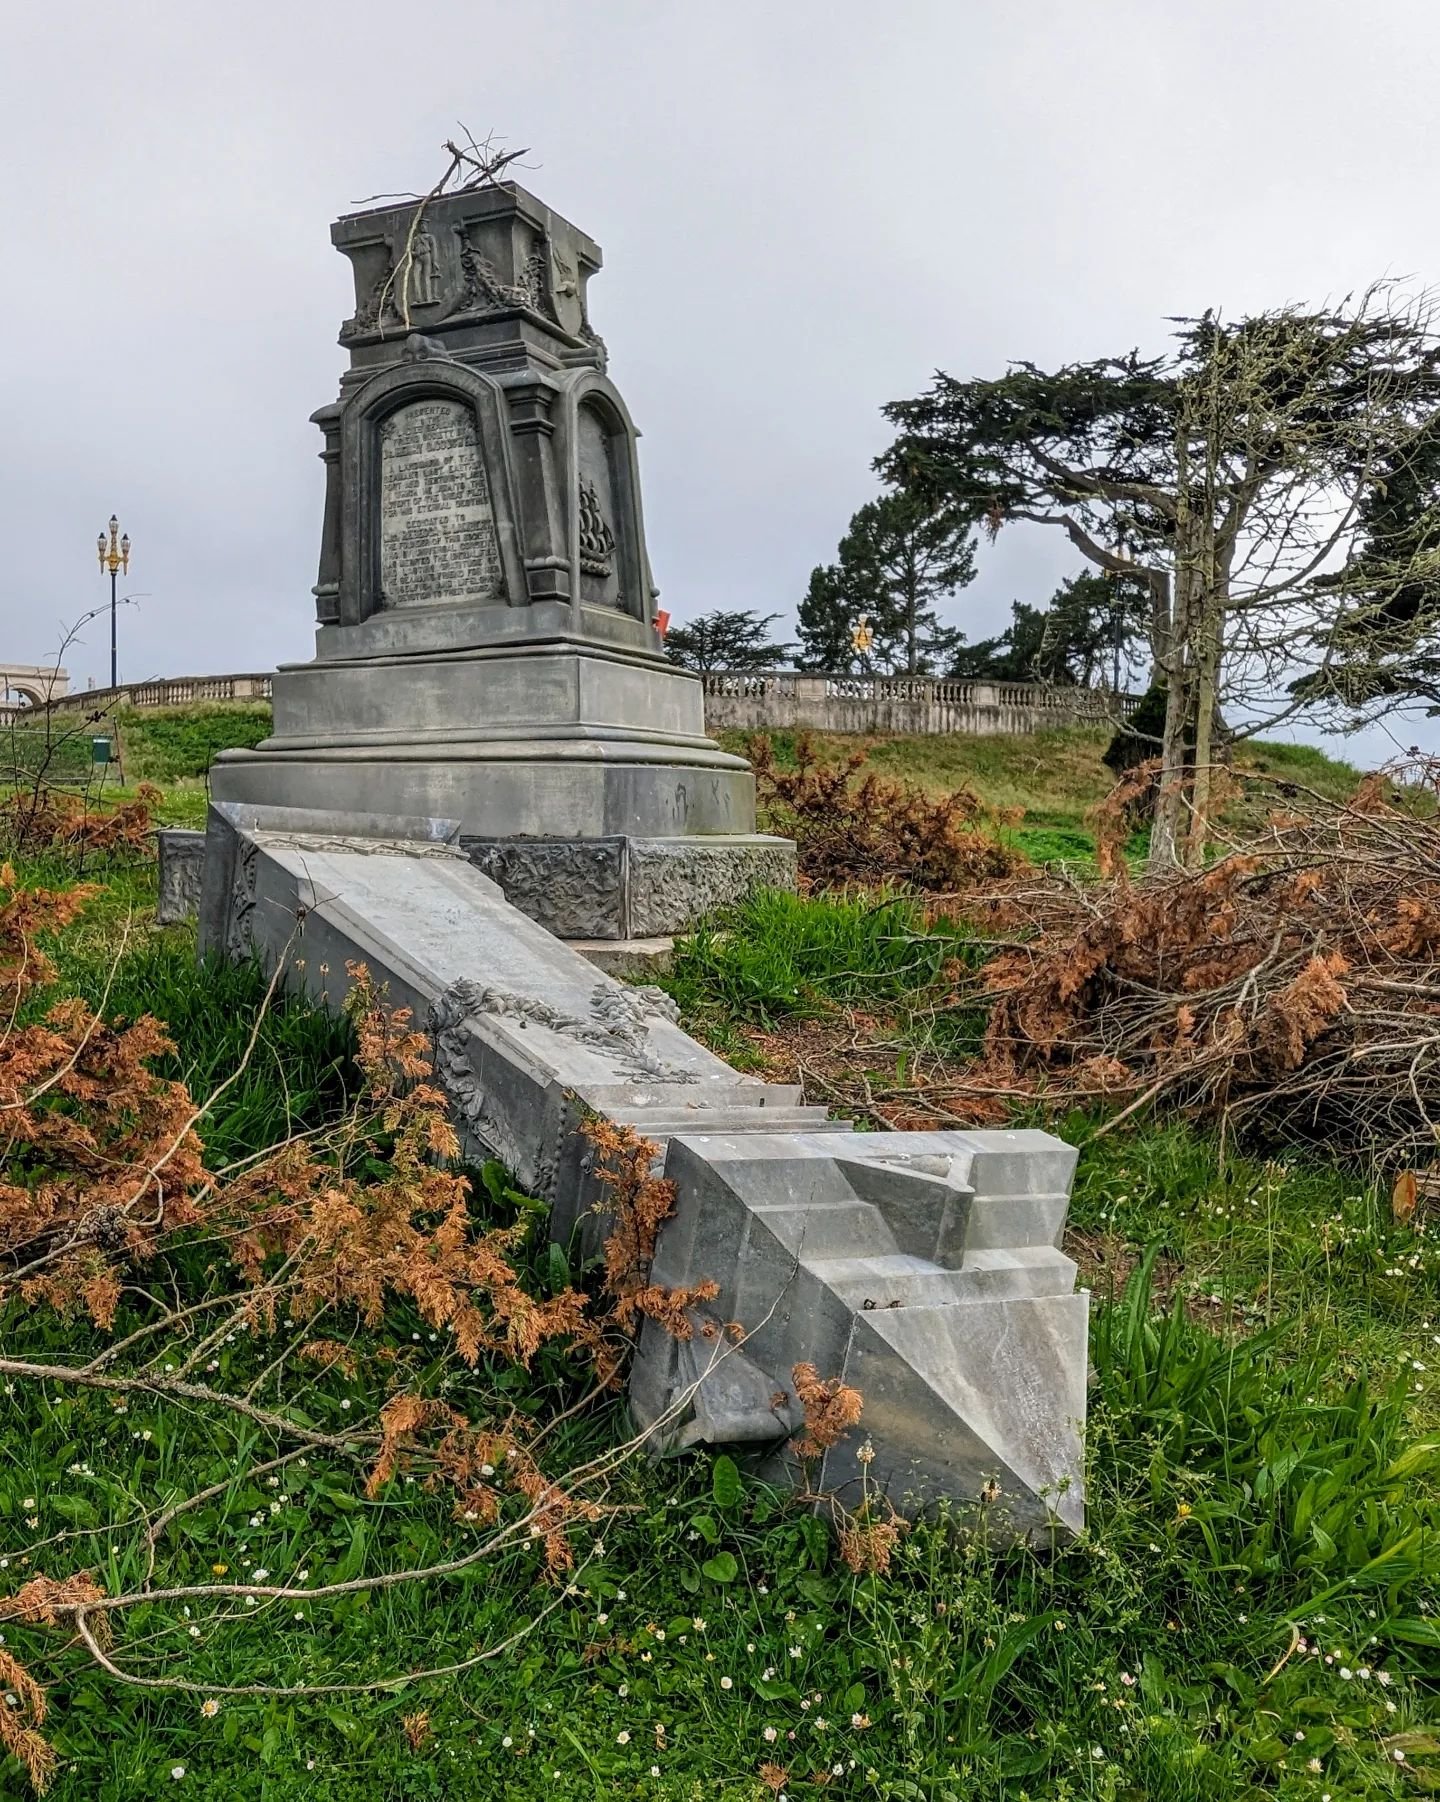 The Ladies Seaman's Friends Society in San Francisco had a plot in San Francisco's City Cemetery (now Lincoln Park Golf Course) where sailors who died in the city could be buried. This monument marks the Society's plot for burials and the sailors, al